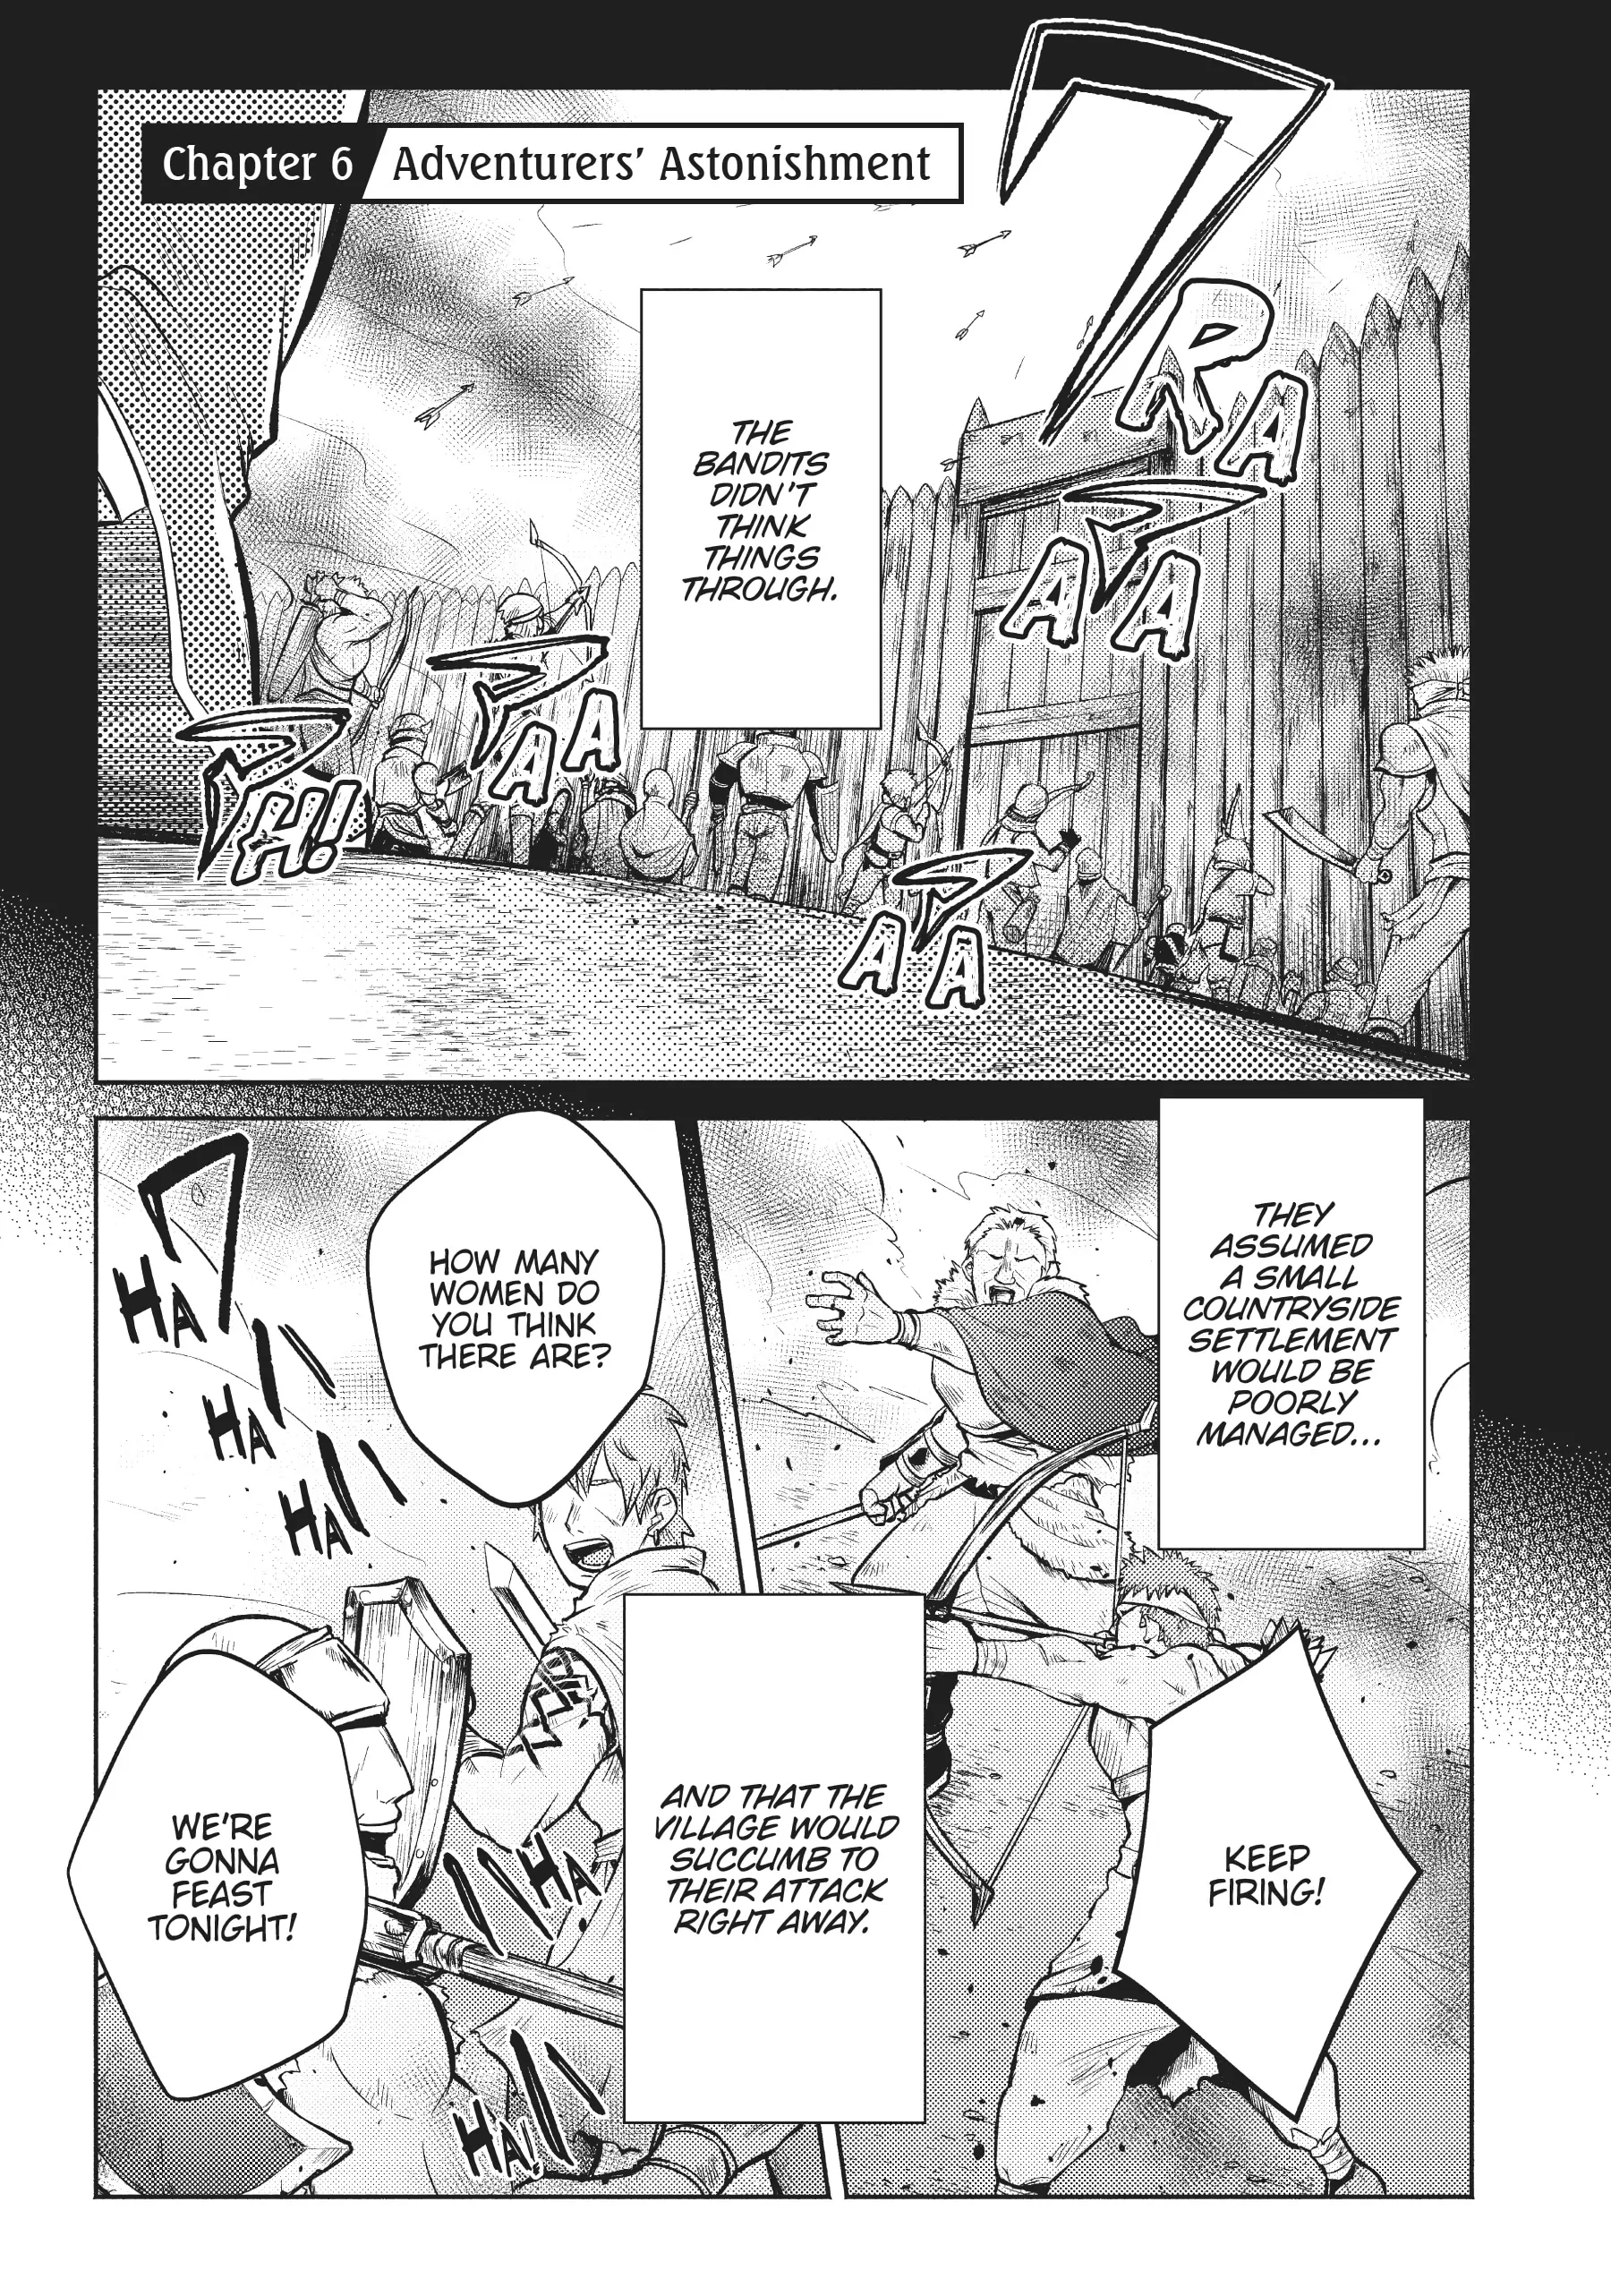 Easygoing Territory Defense By The Optimistic Lord: Production Magic Turns A Nameless Village Into The Strongest Fortified City - Page 1